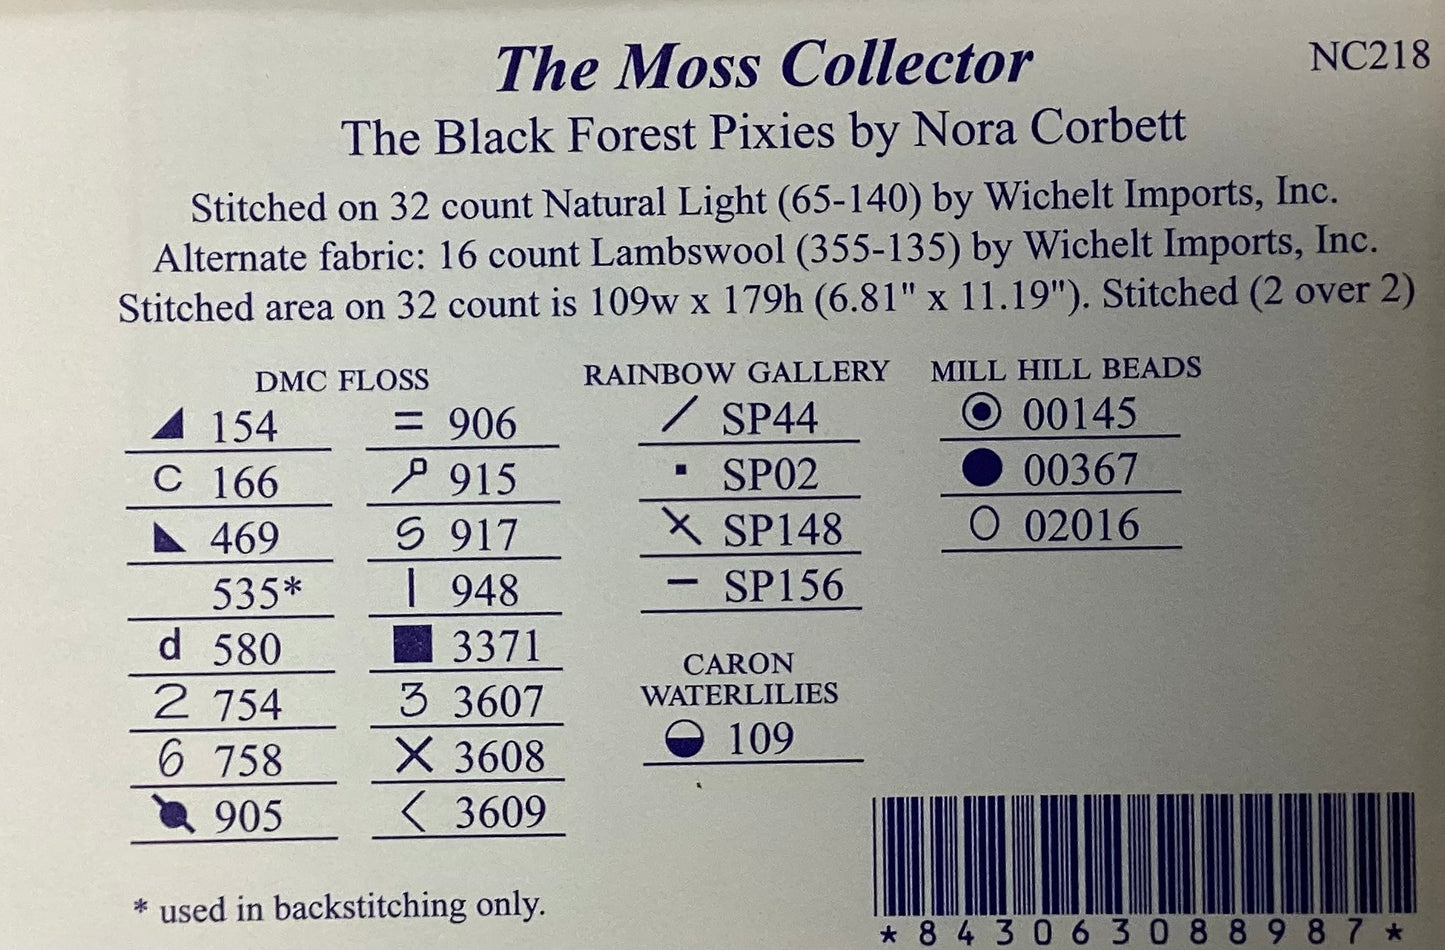 The Moss Collector by Nora Corbett